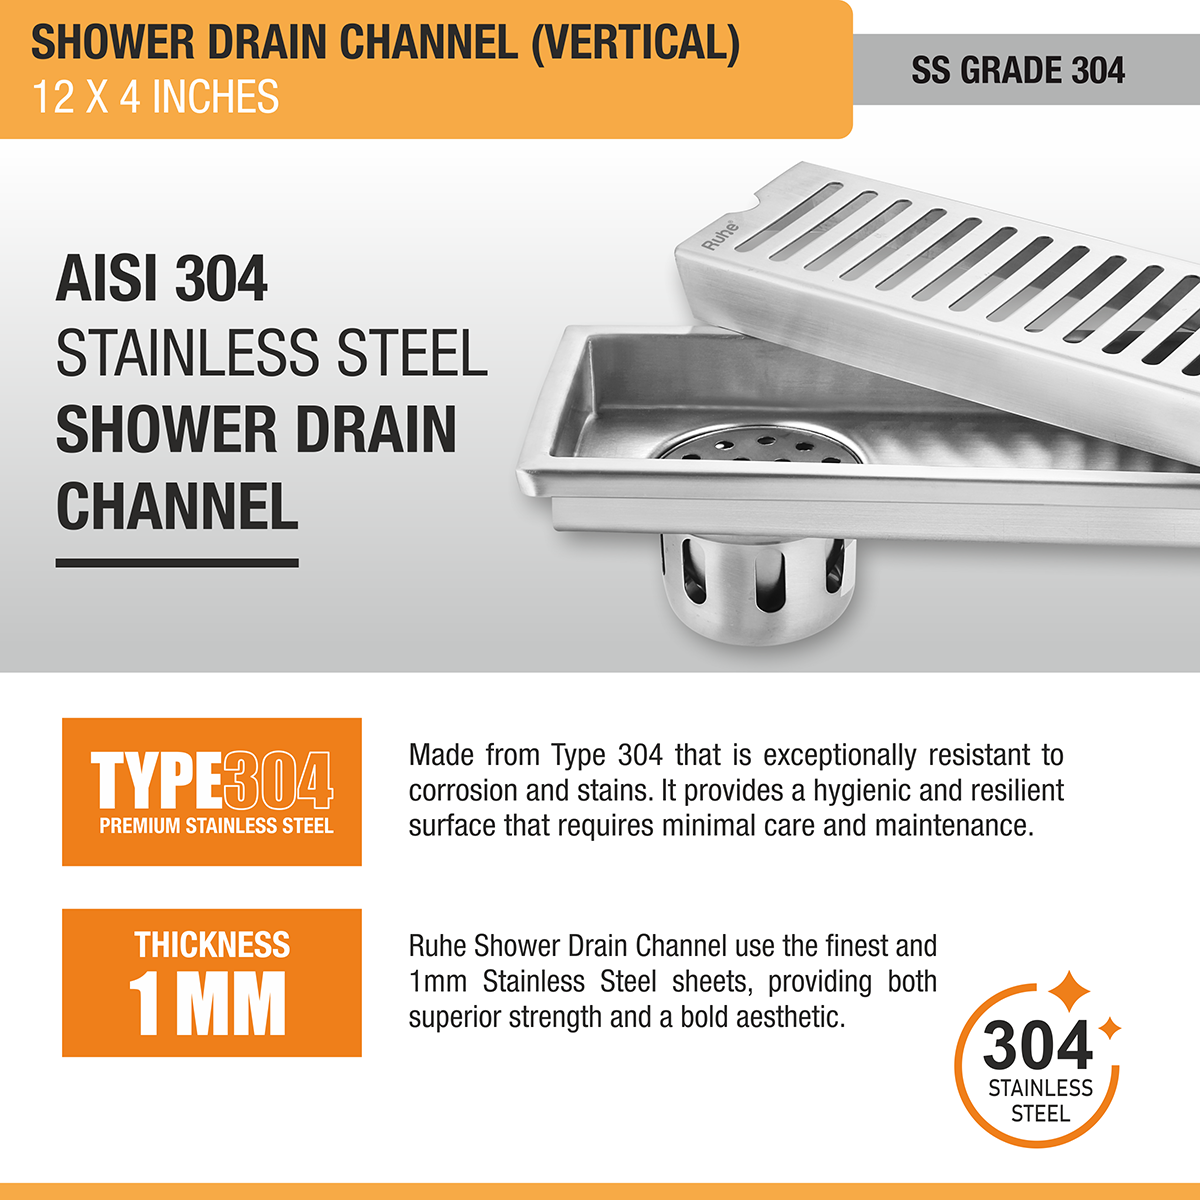 Vertical Shower Drain Channel (12 x 4 Inches) with Cockroach Trap (304 Grade) stainless steel